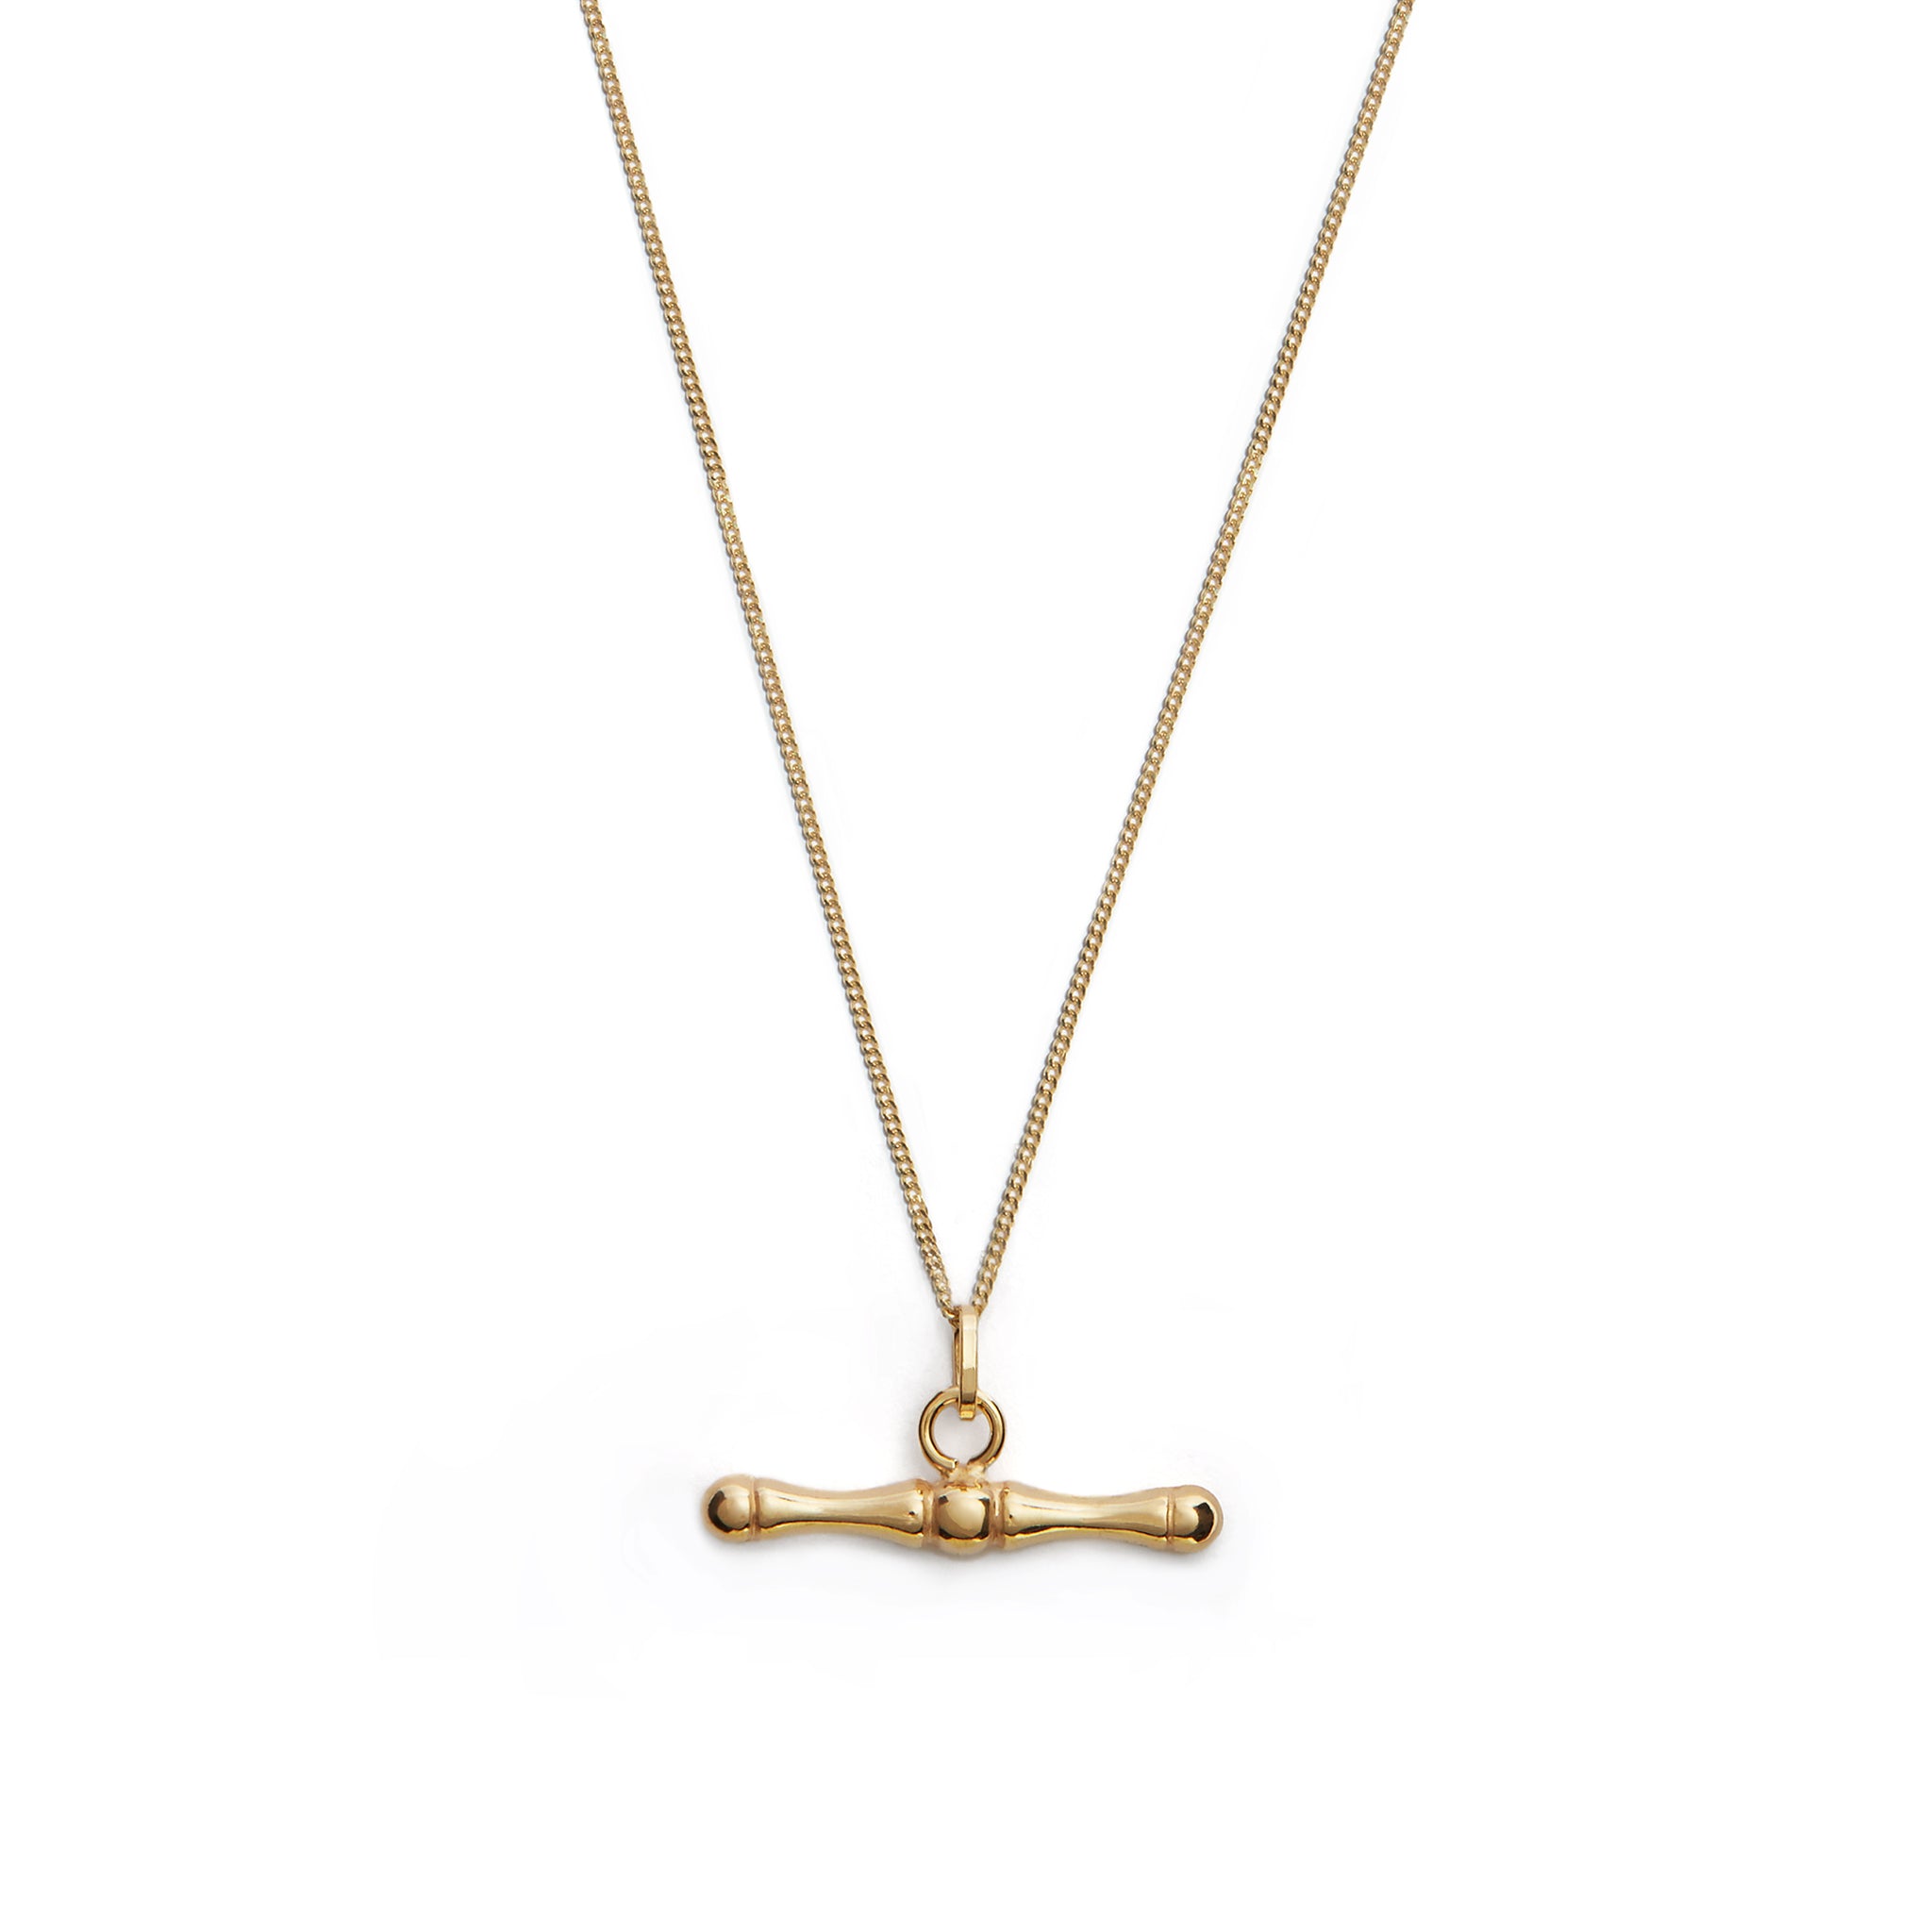 Elevate your ensemble with the 9 carat yellow gold rounded T-Bar necklace. This classic accessory features a sleek and polished T-Bar design, perfect for adding a touch of sophistication and elegance to any outfit.